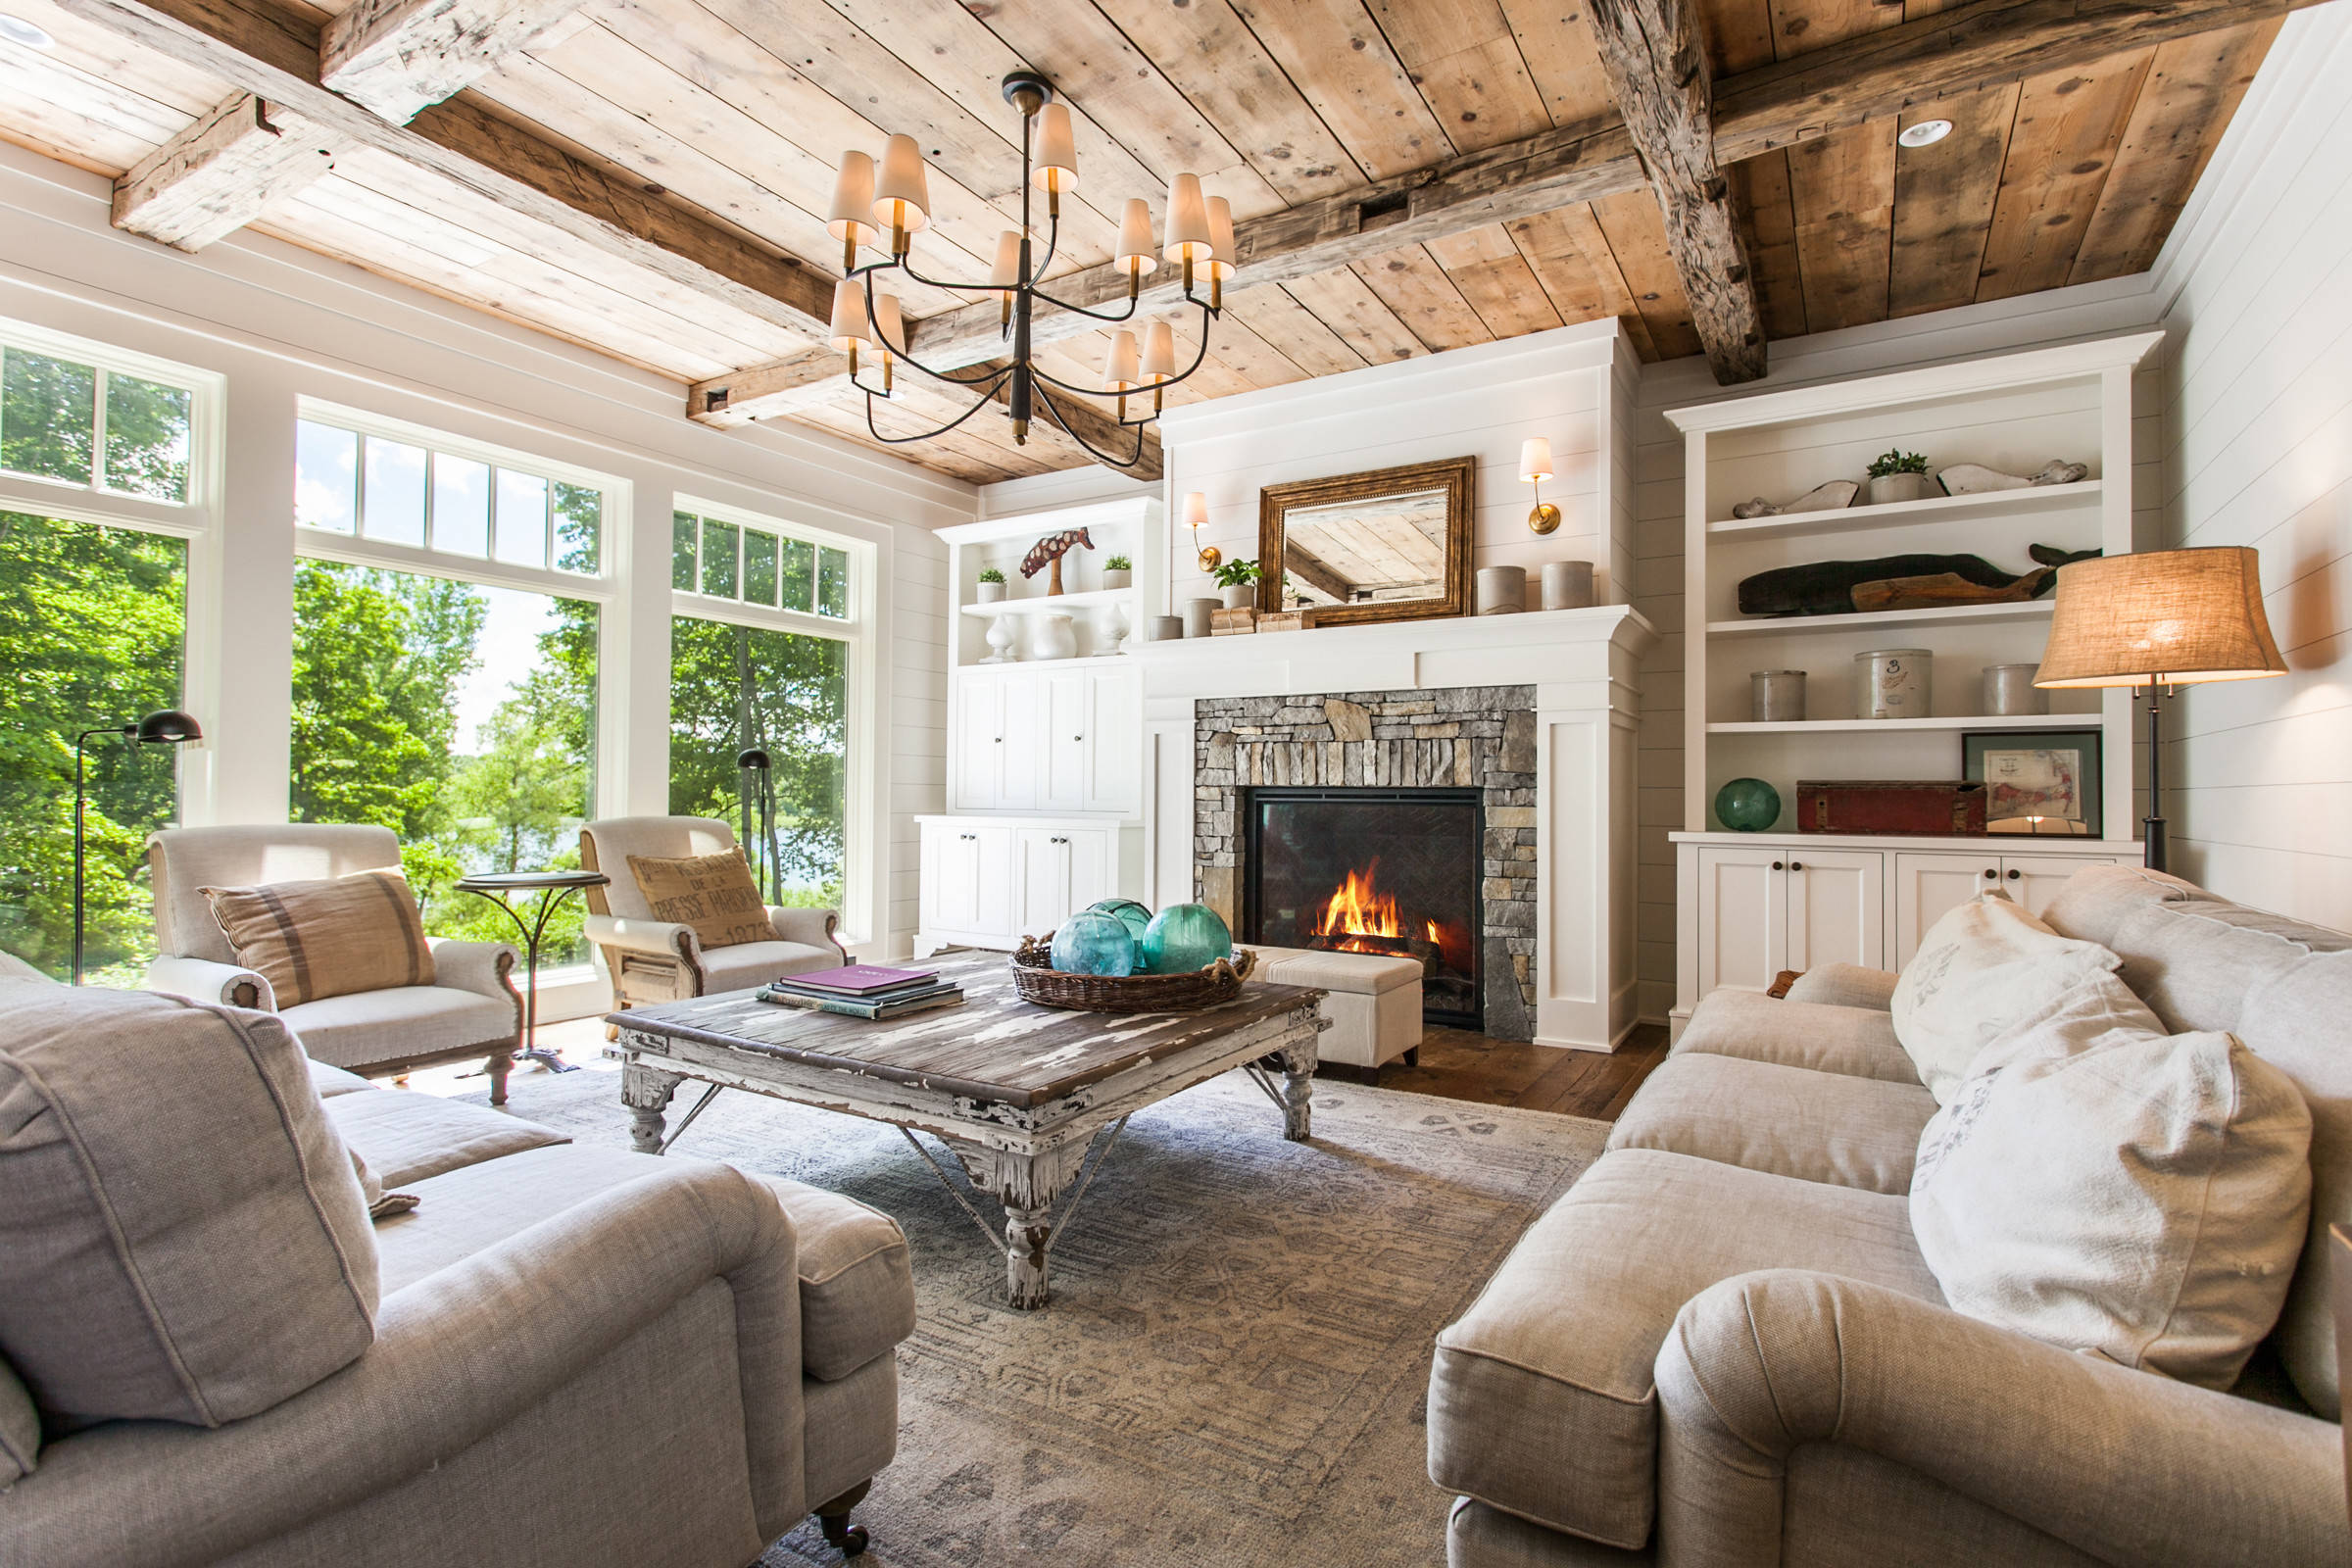 Rustic and Chic: How to Create a Farmhouse Living Room - Trendy Home Hacks